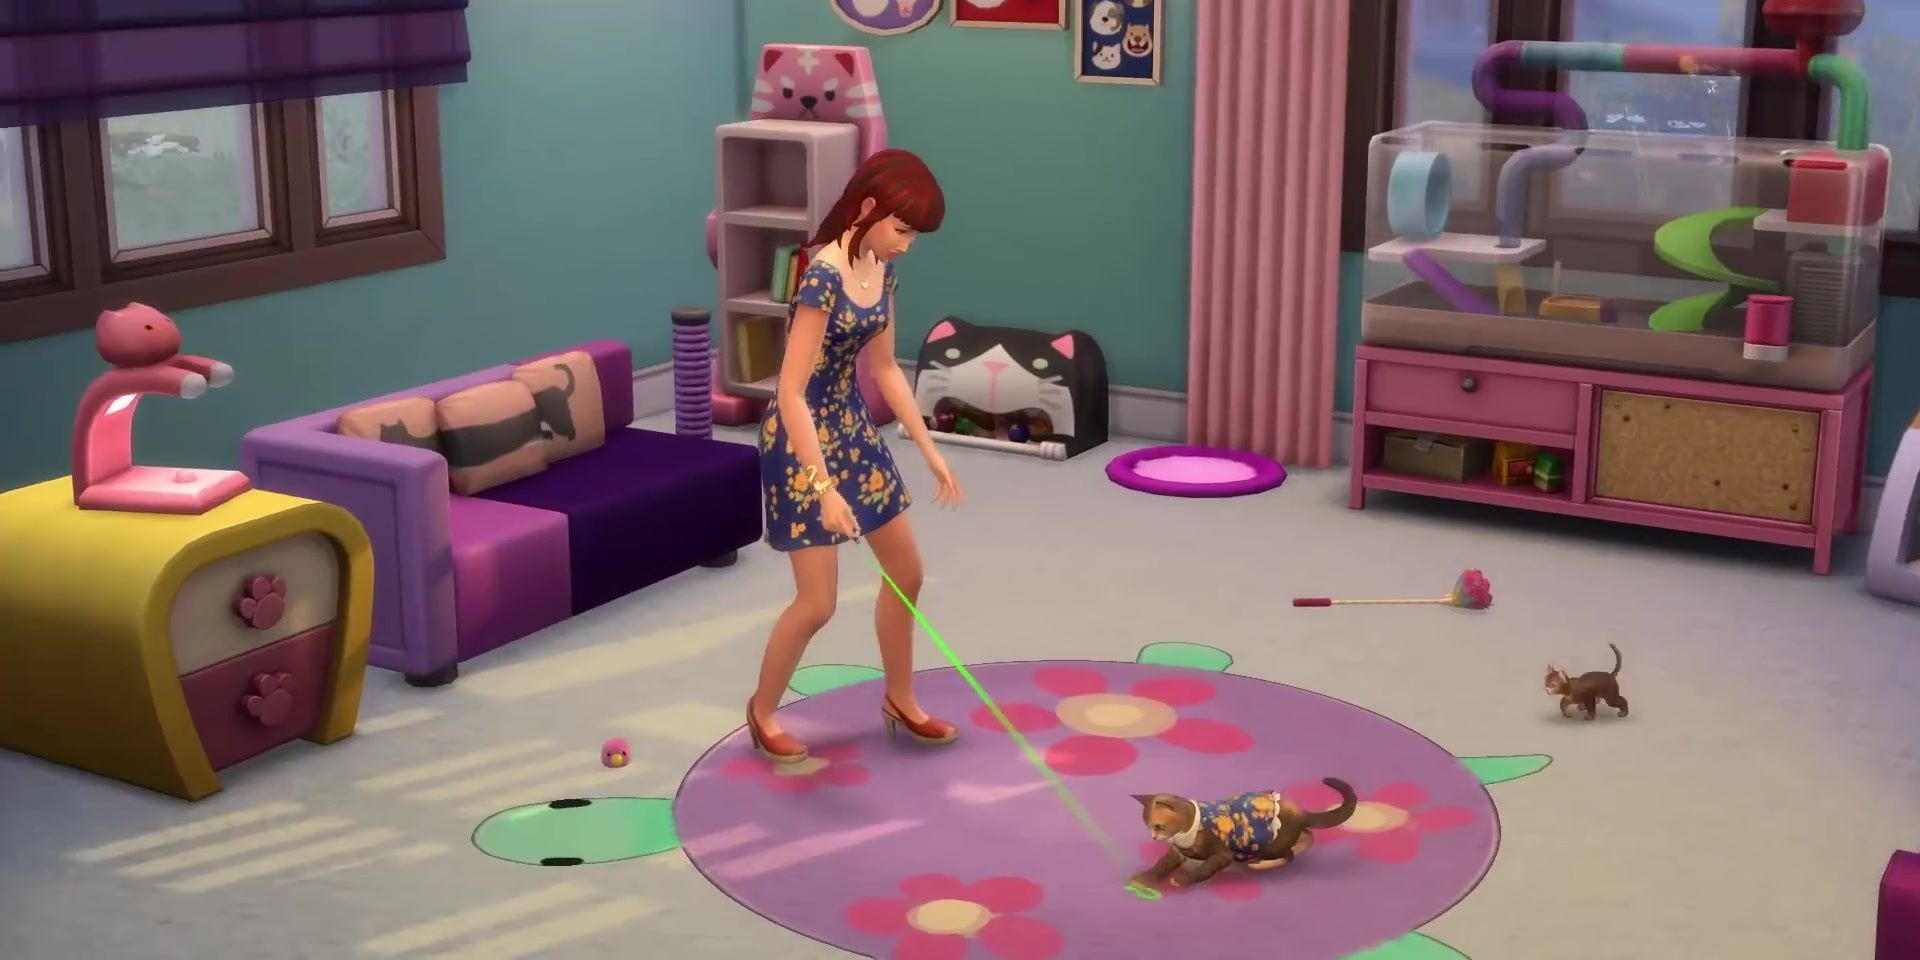 A Sim plays with her cat while kittens run around the brightly-colored purple and blue room